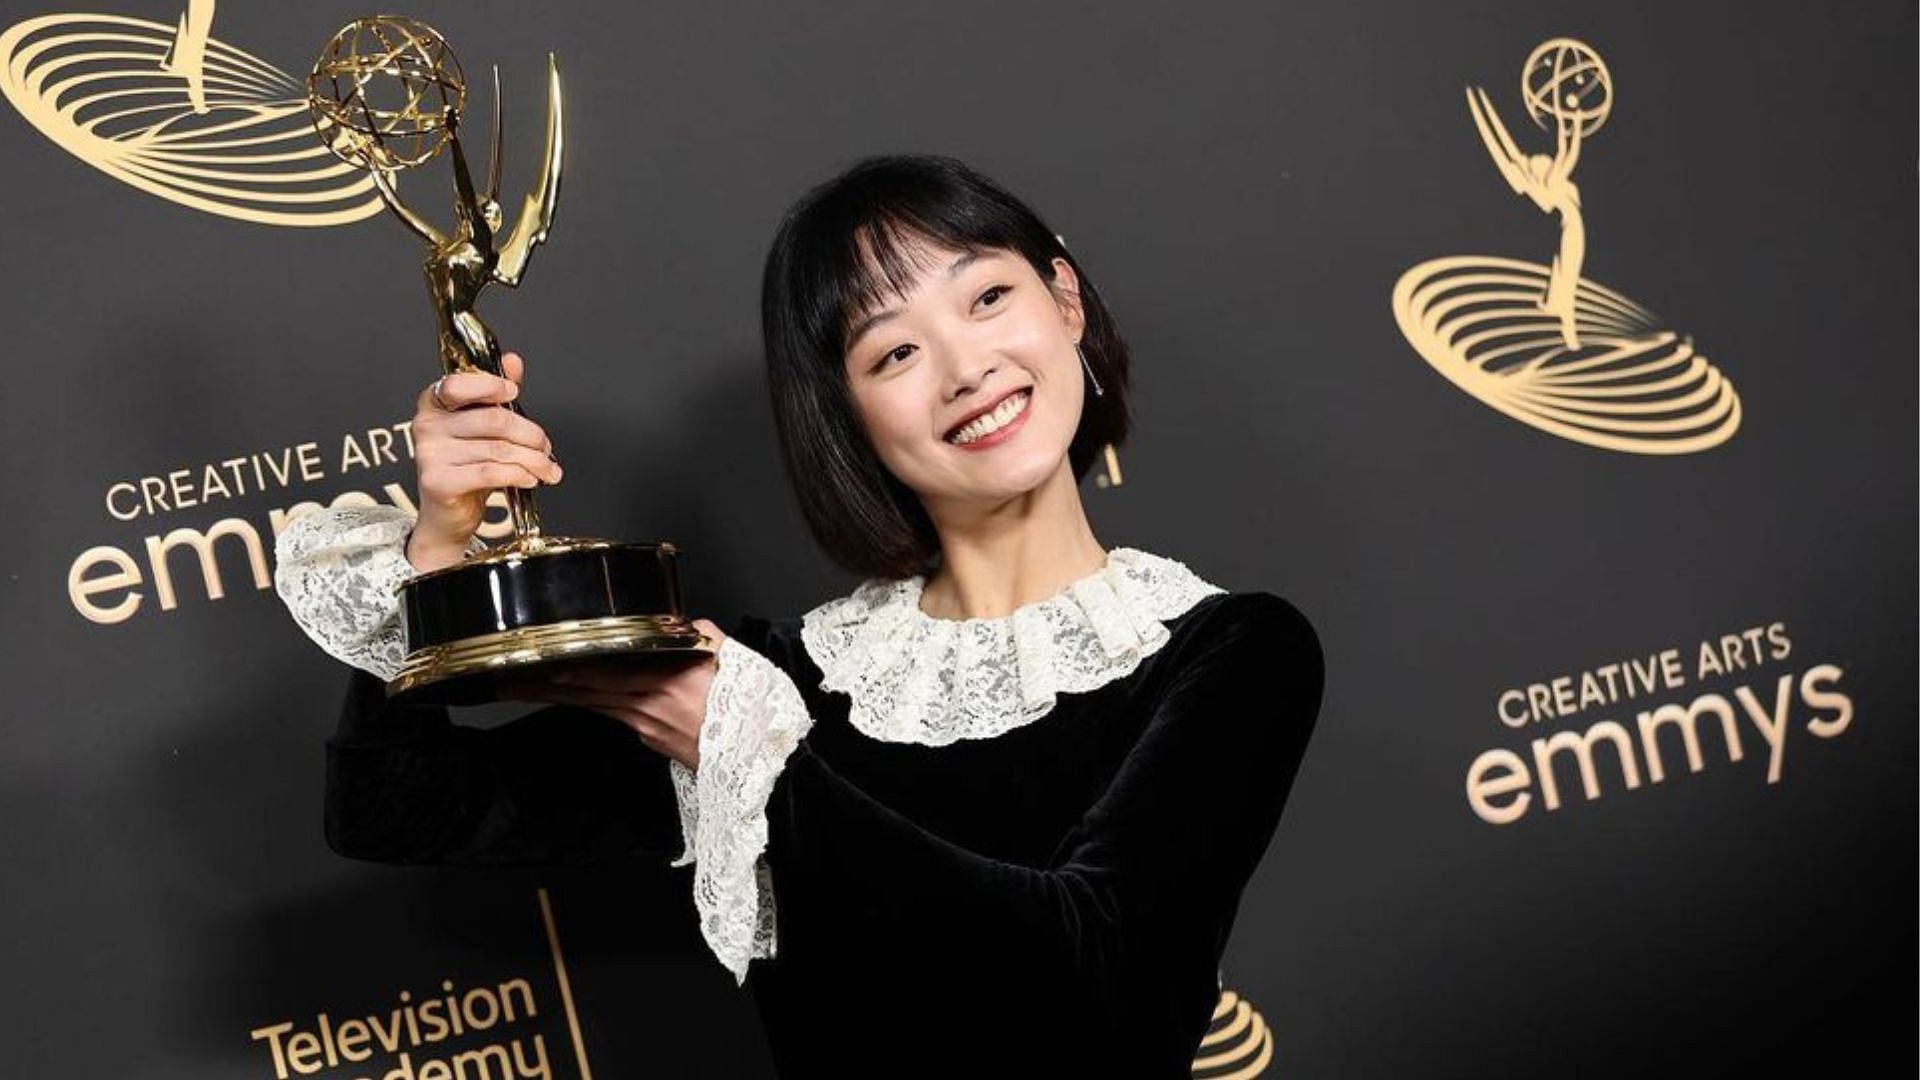 Lee Yoo-mi becomes the first Korean actress to win Outstanding Guest Actress award at Creative Arts Emmys (Image via Instagram/leeyoum262)